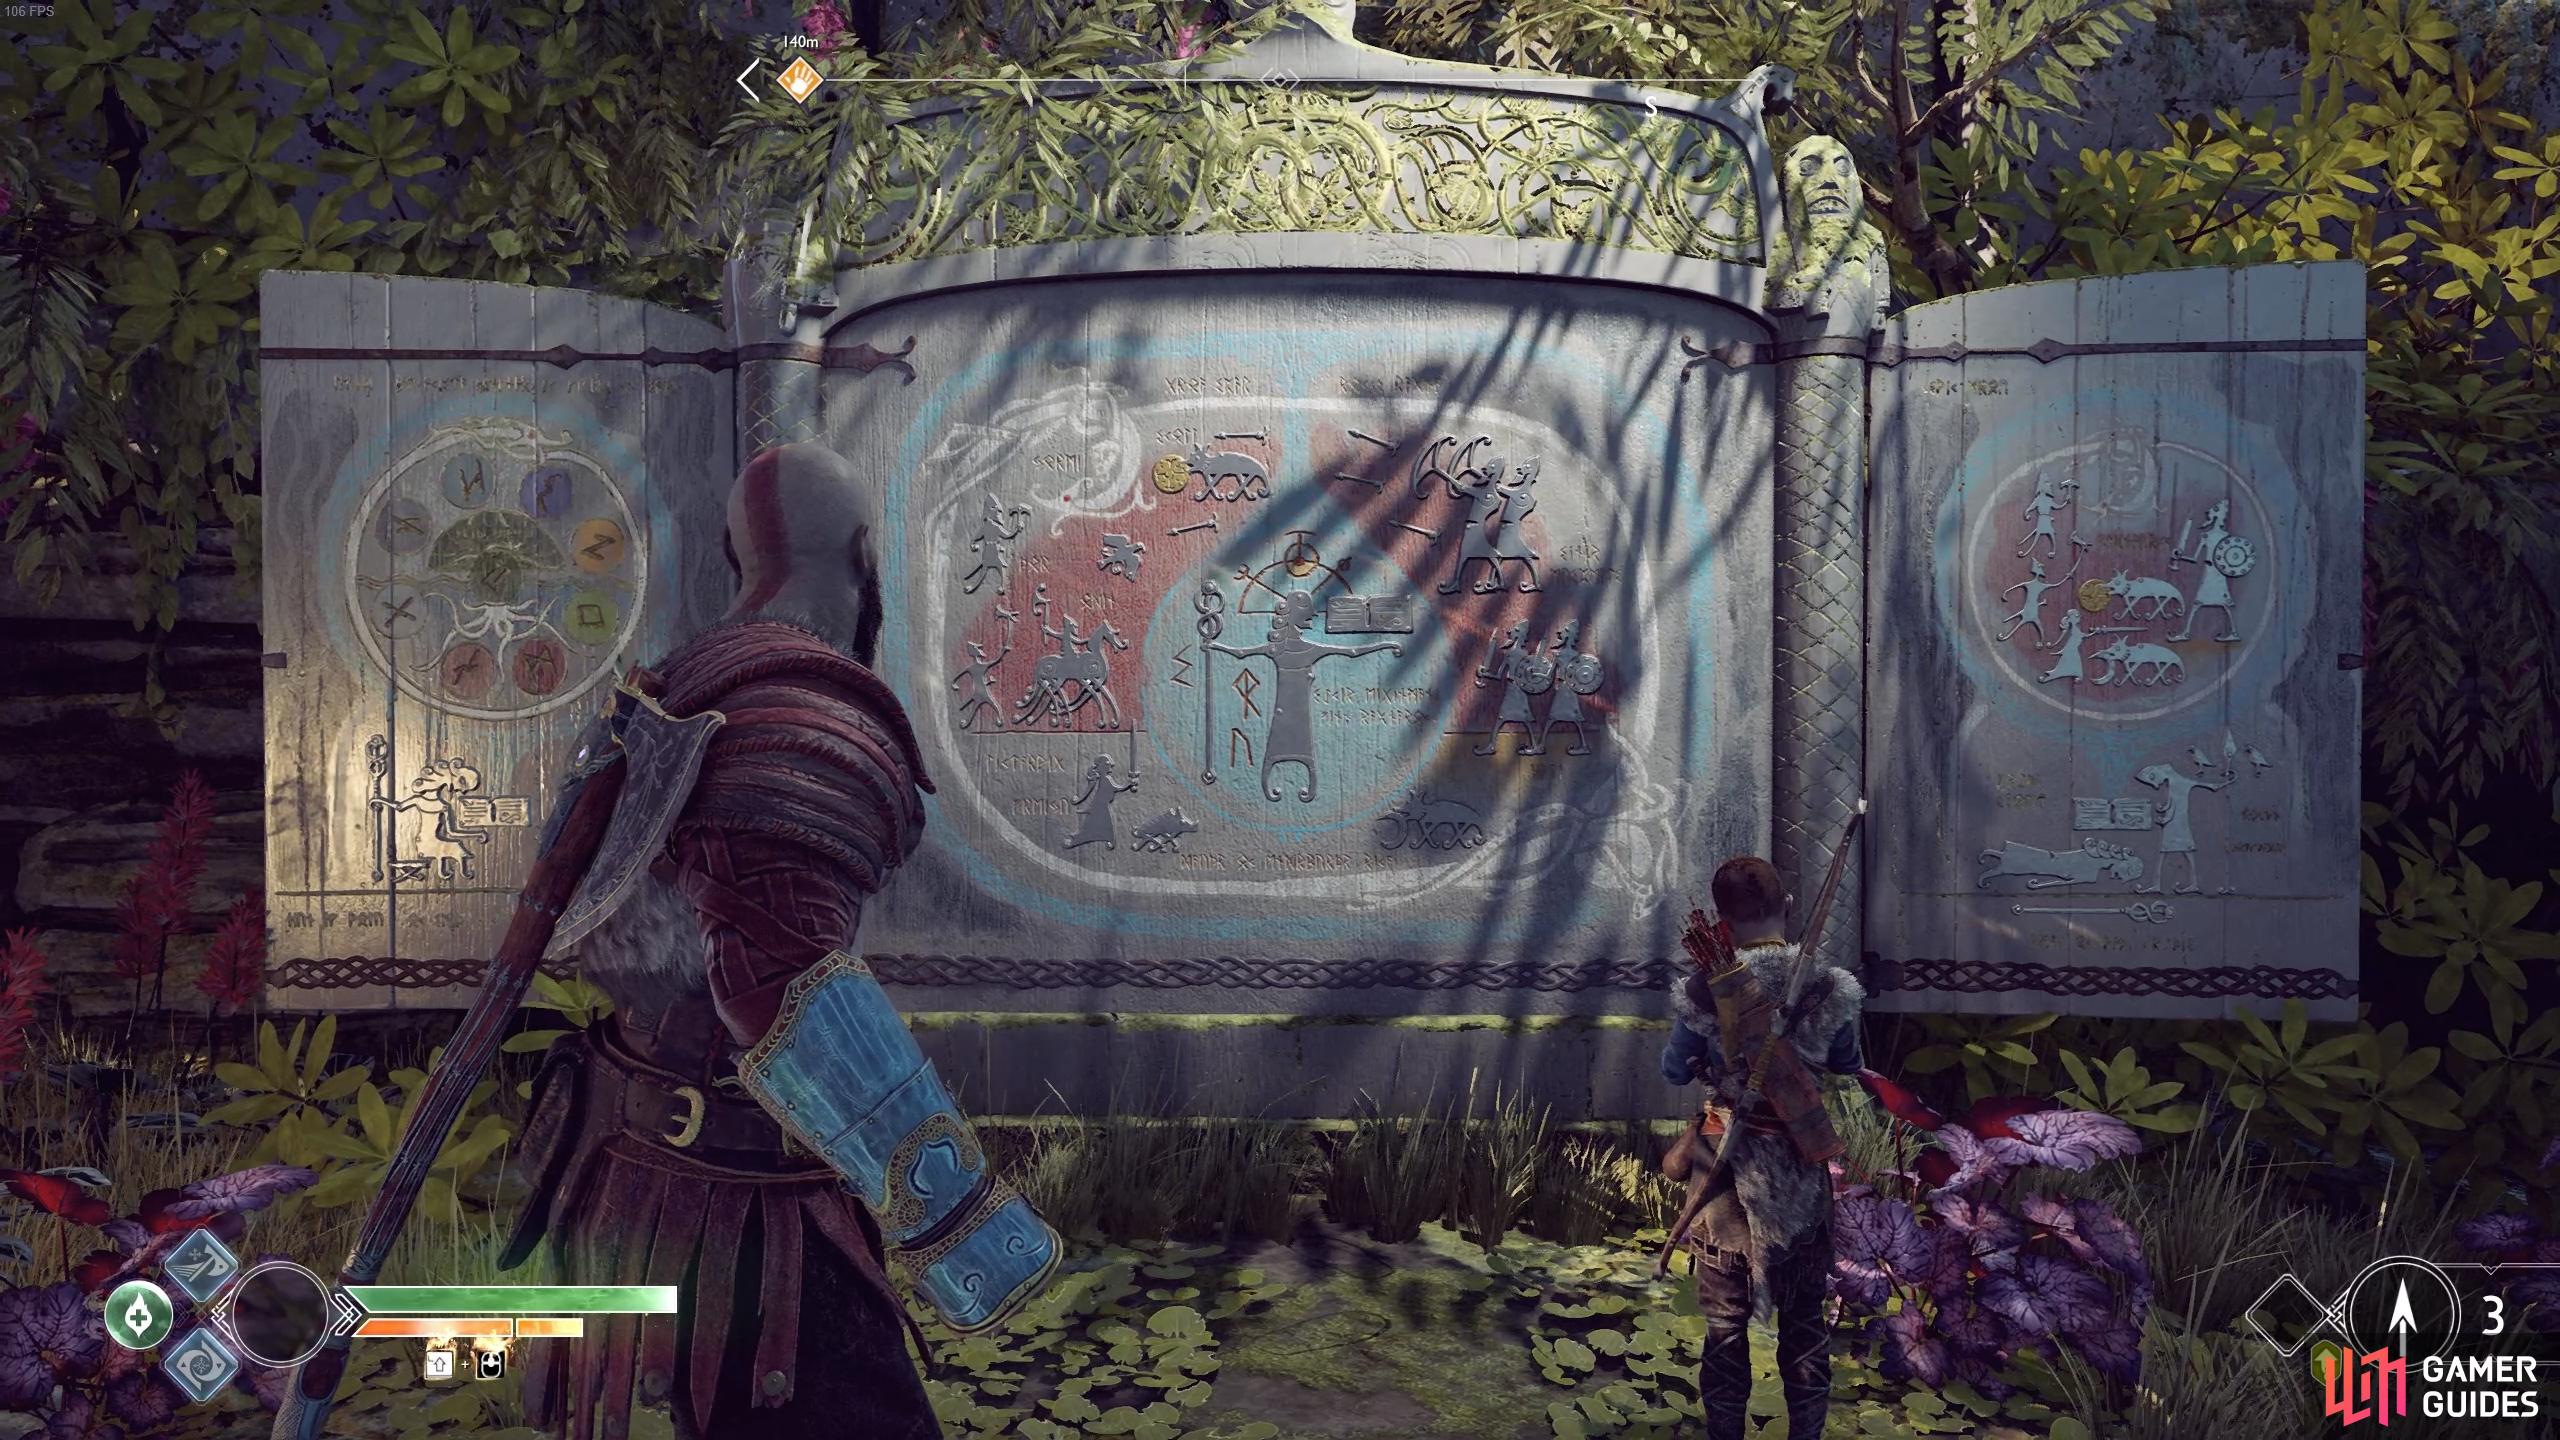 You can’t miss this Shrine next to Sindri’s Shop.